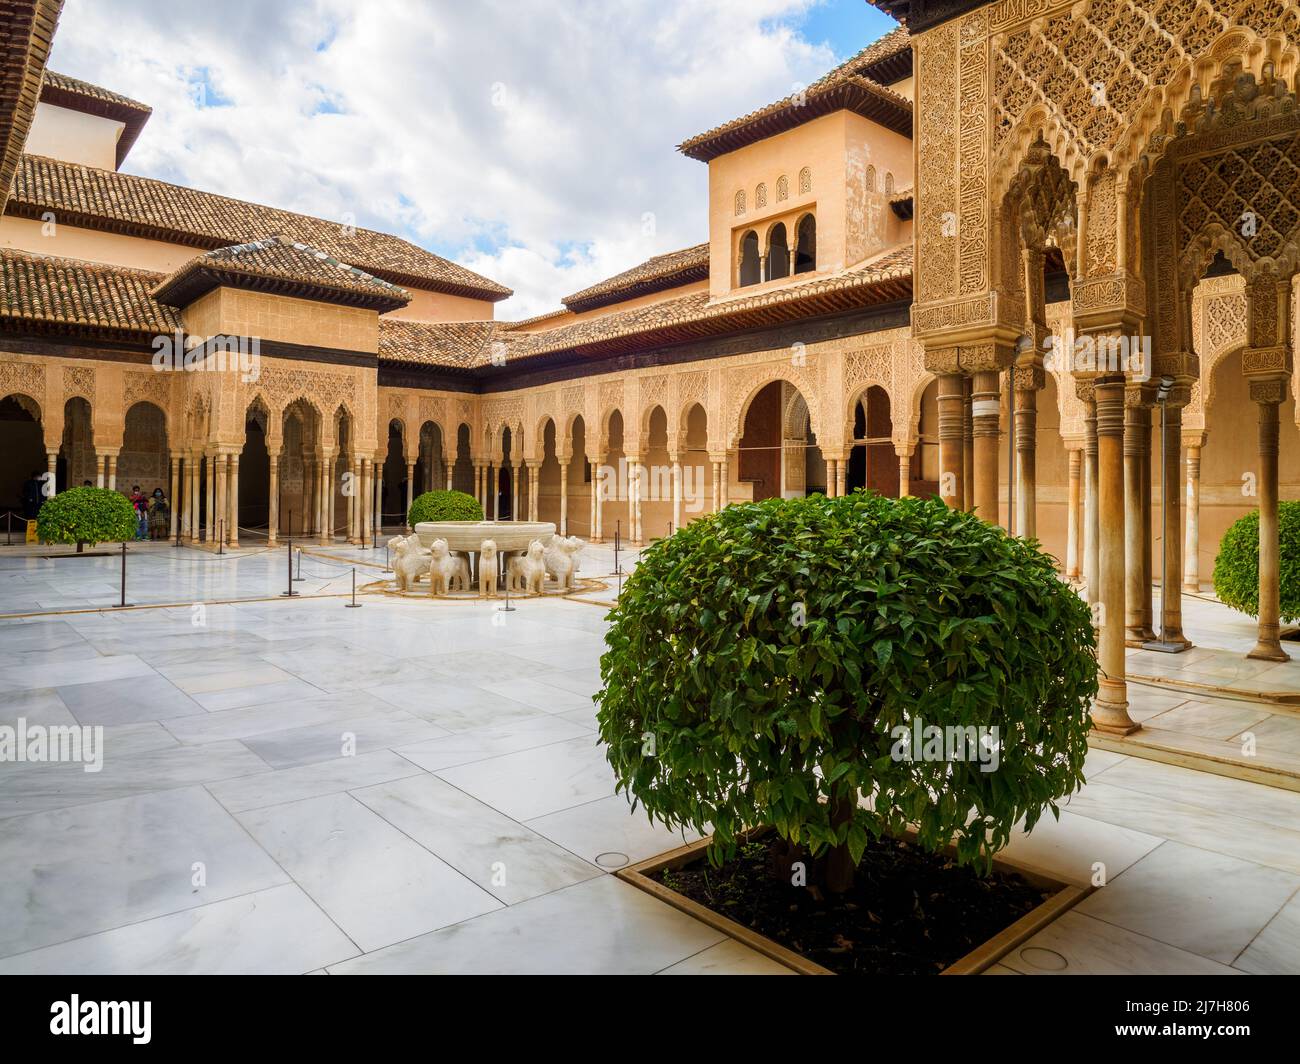 Court of the Lions in the Nasrid royal palaces complex - Alhambra complex - Granada, Spain Stock Photo